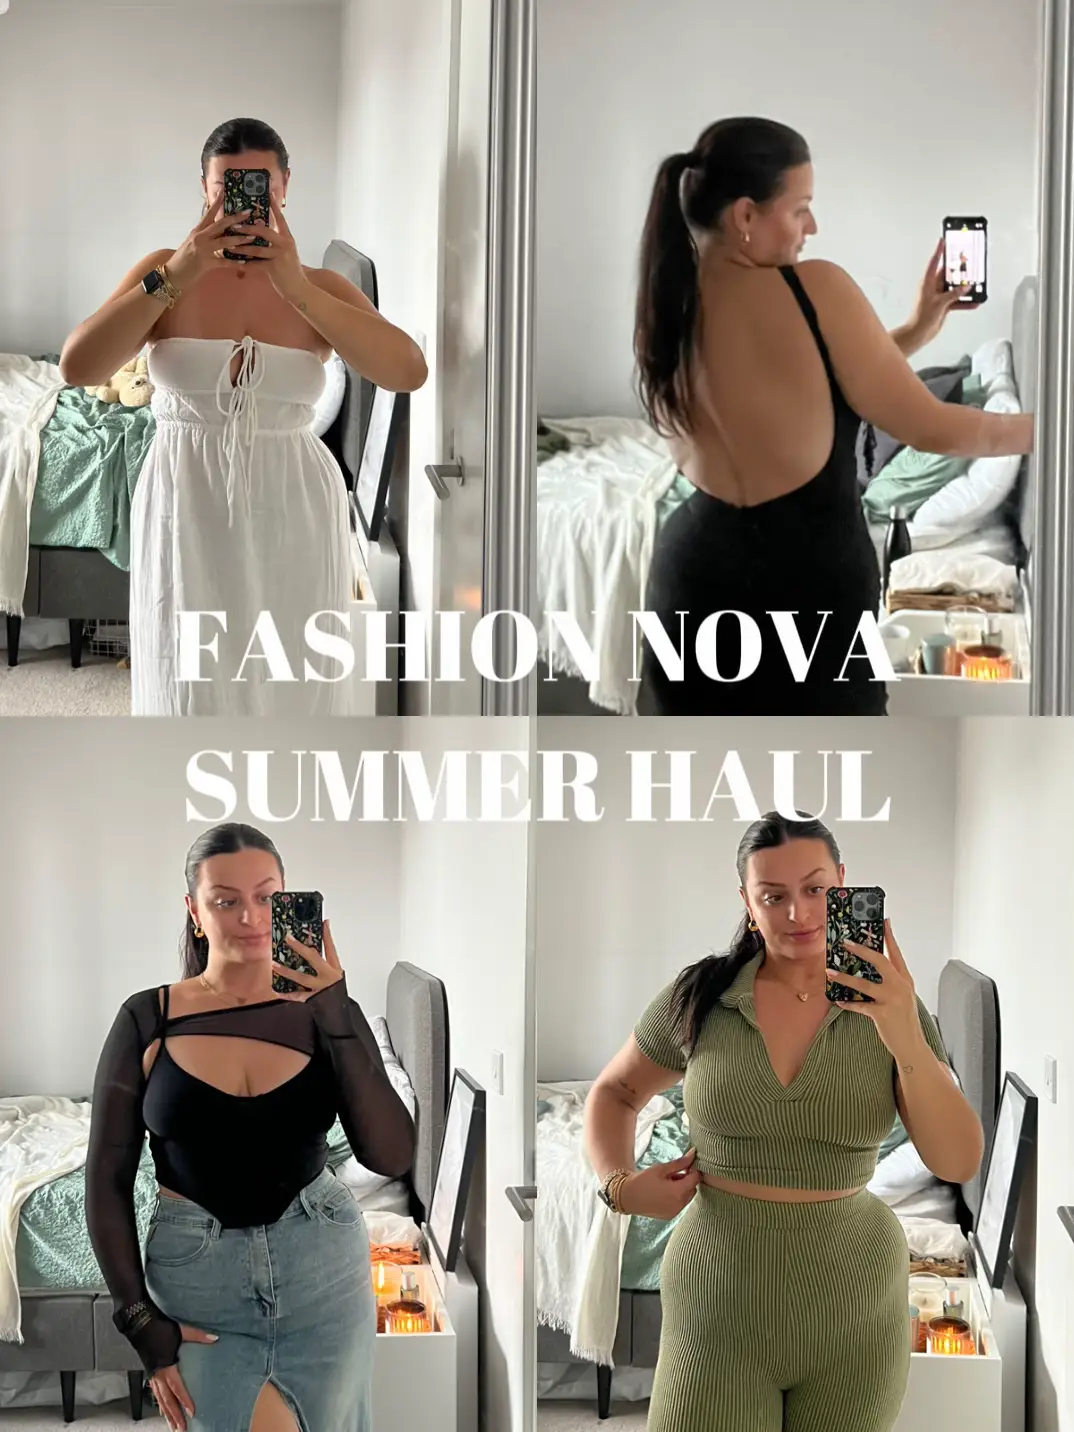 Particular with it . @FashionNova Adore how their new “perfectly